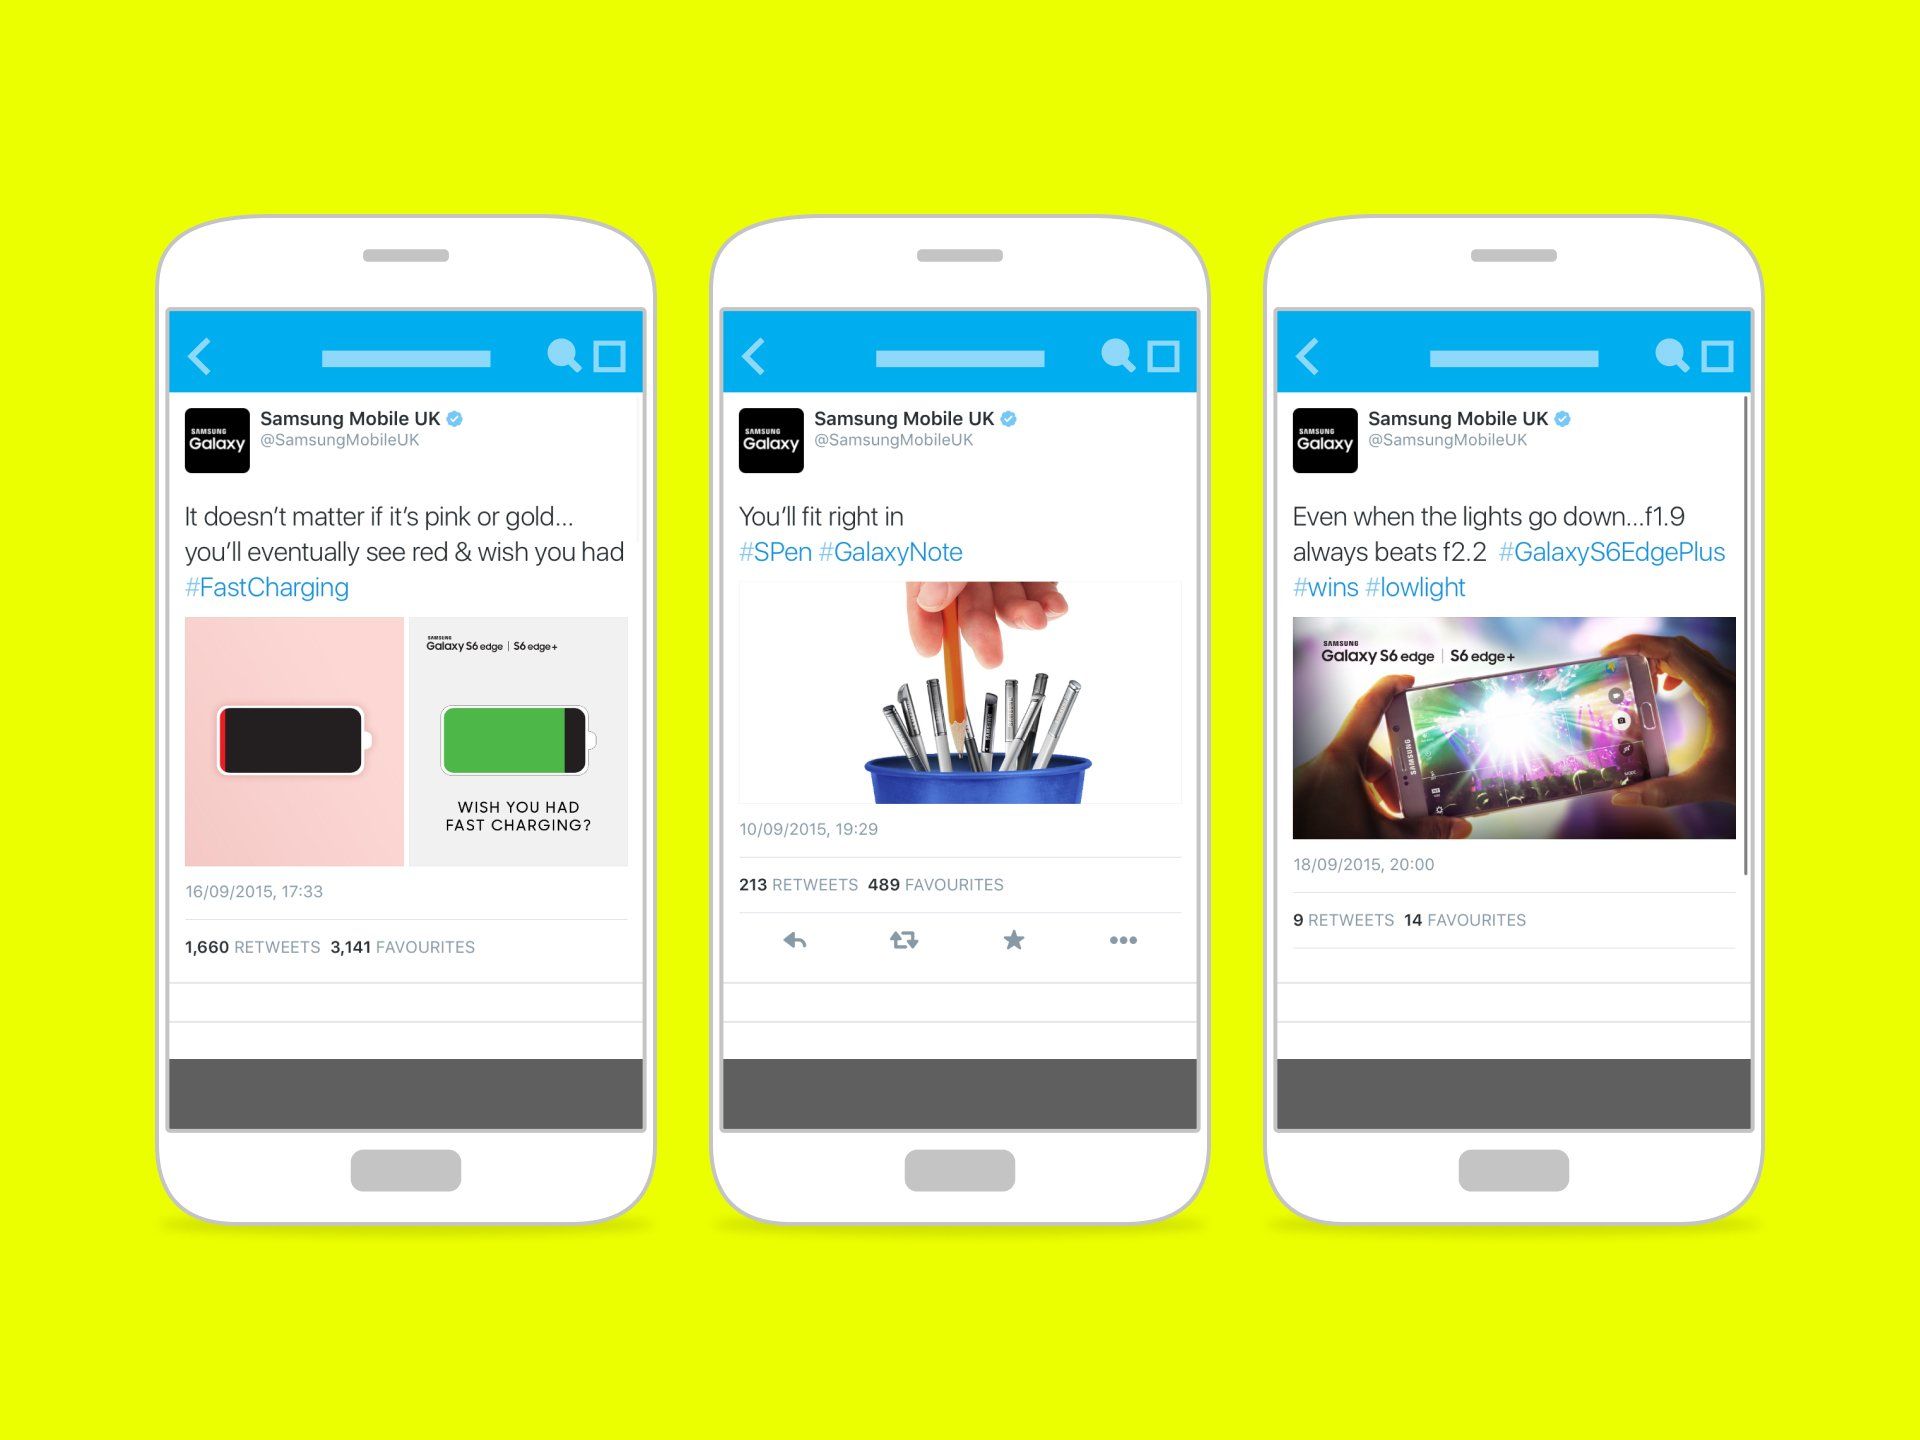 Planned Twitter content for Samsung's Newsjacking event to promote the Galaxy S6. © The Animo Group Ltd.